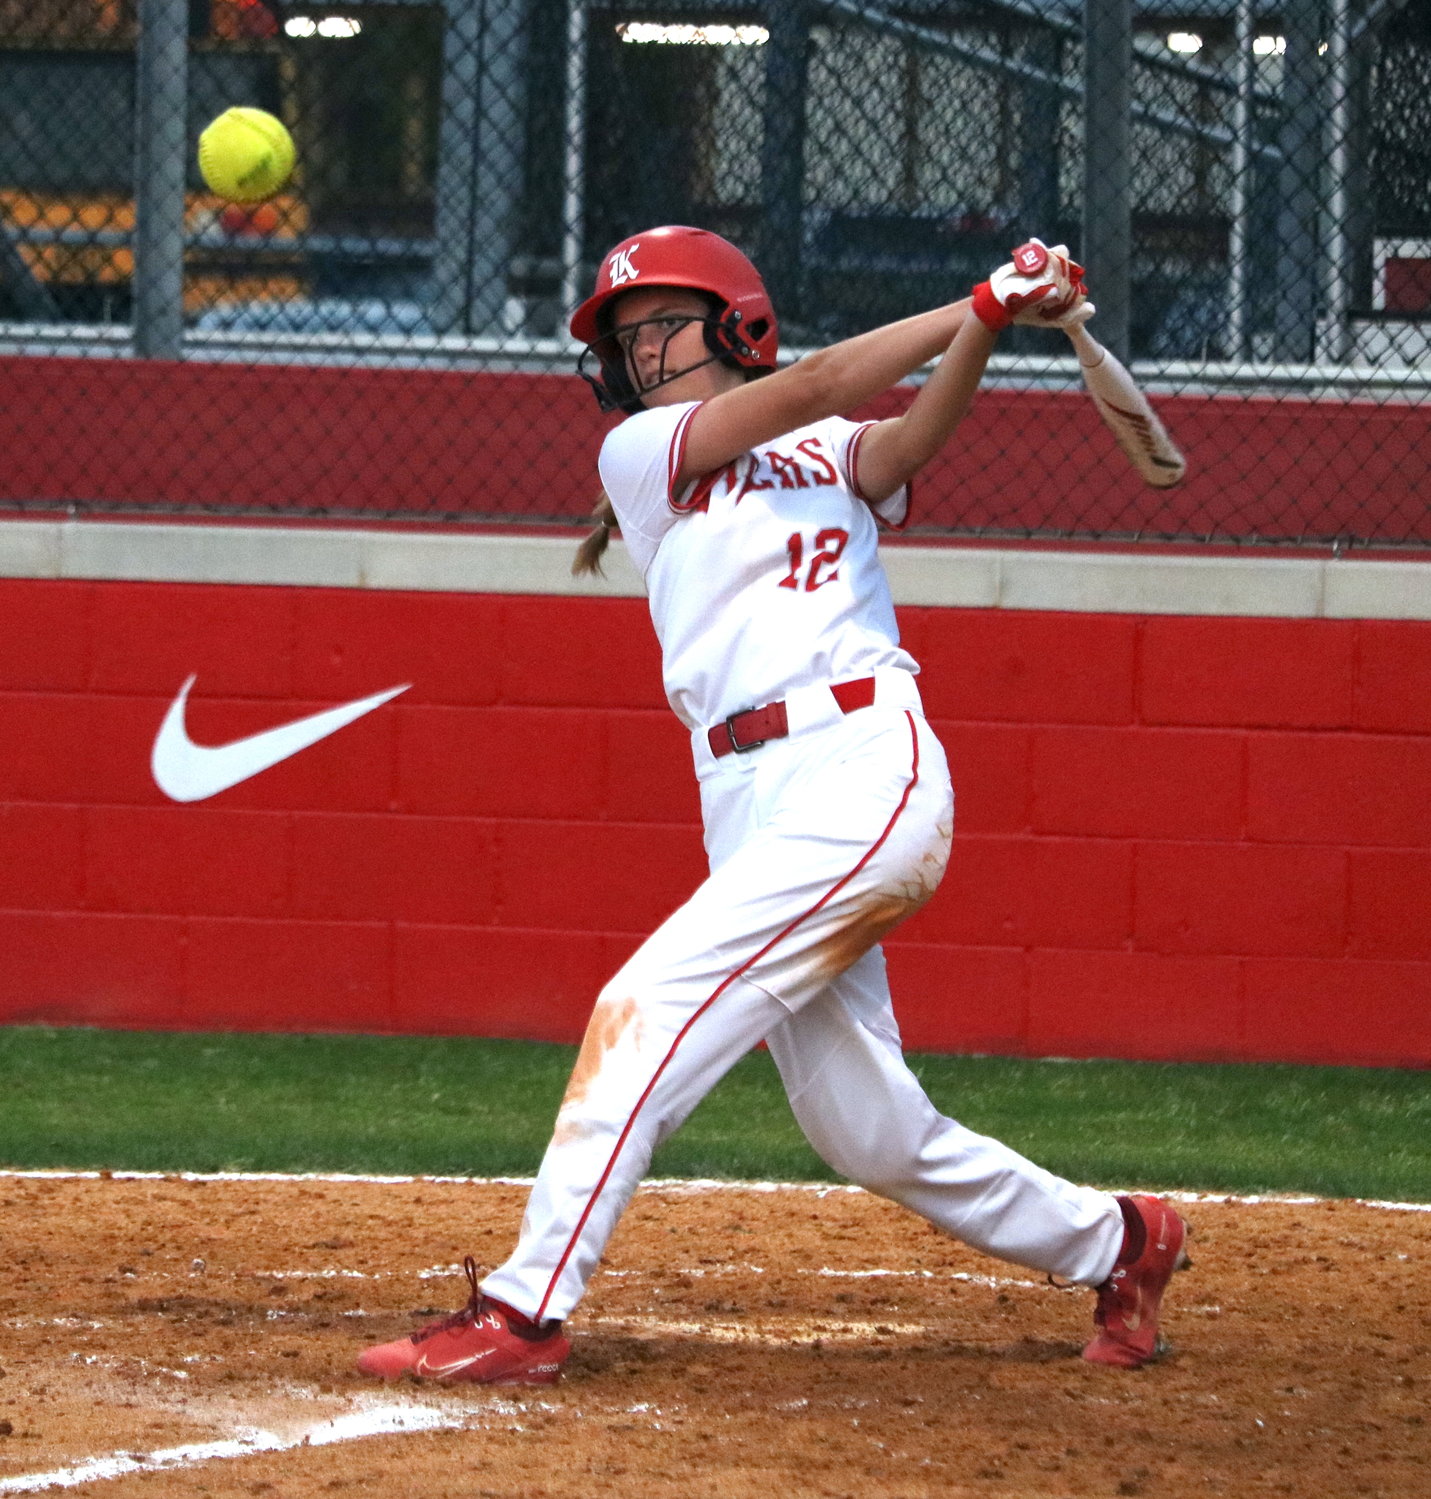 Avery Porter hits during Friday's District 19-6A game between Katy and Cinco Ranch at the Katy softball field.